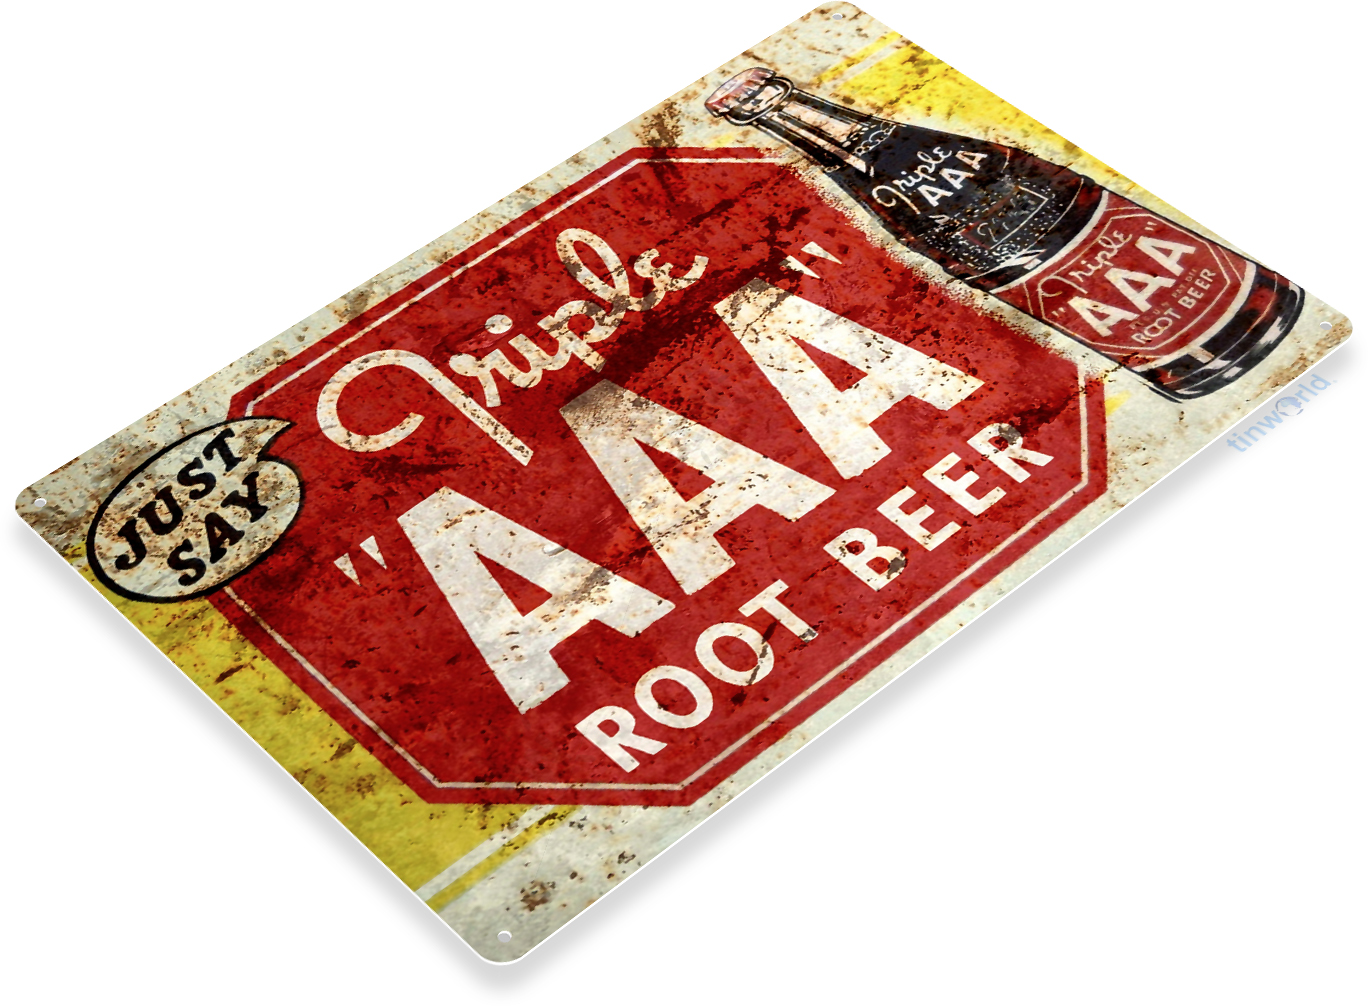 who invented root beer